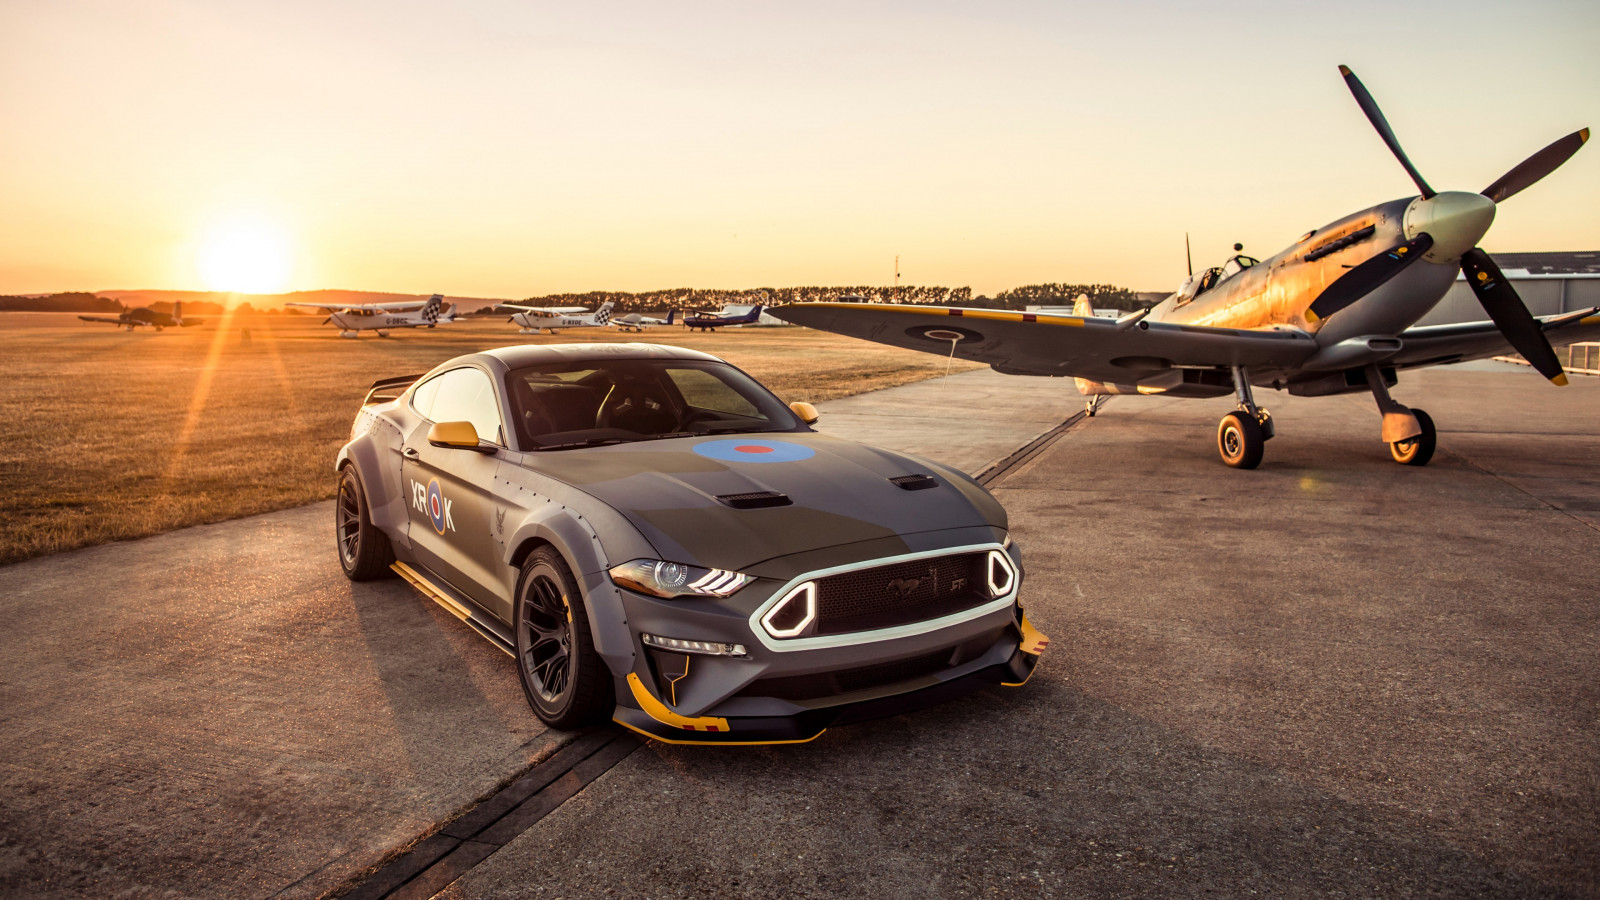 Ford Eagle Squadron Mustang GT wallpaper 1600x900